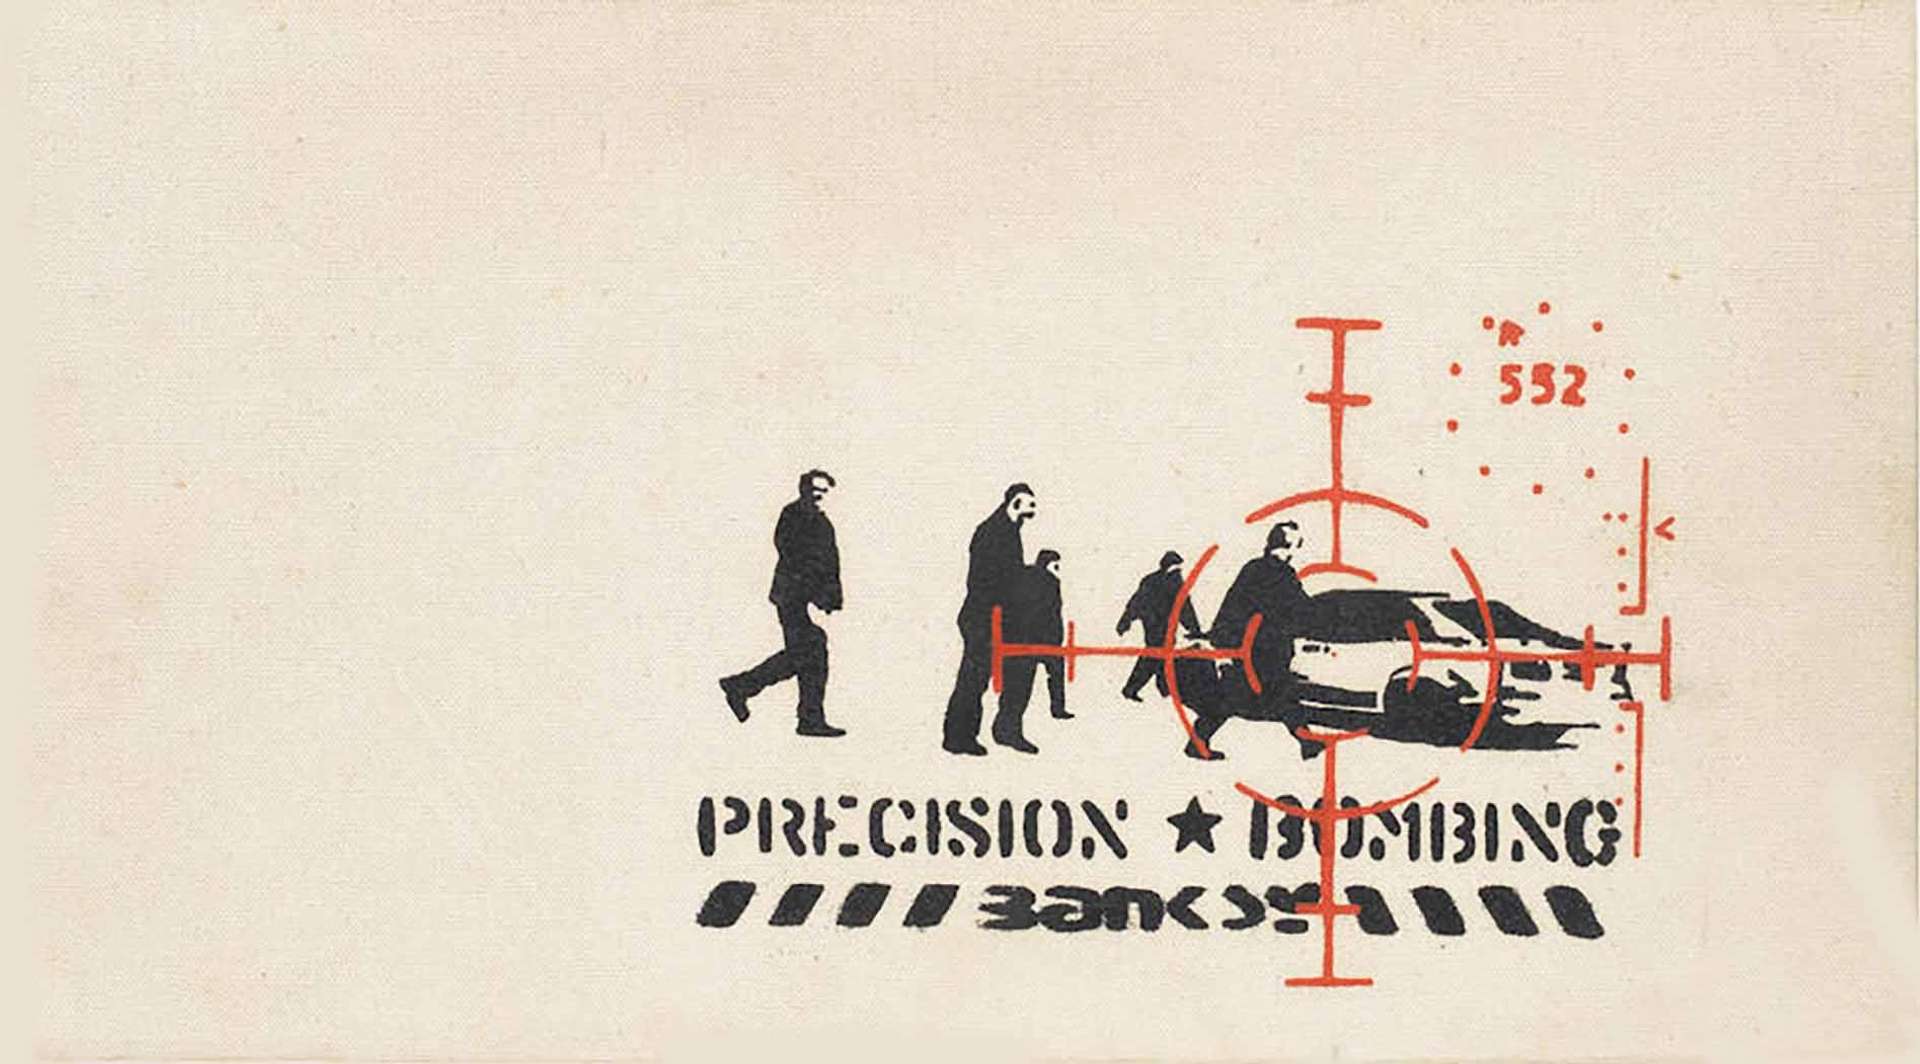 This print shows 5 figures walking towards a car, under surveillance by a precision pointer. The work's title is written underneath the group.